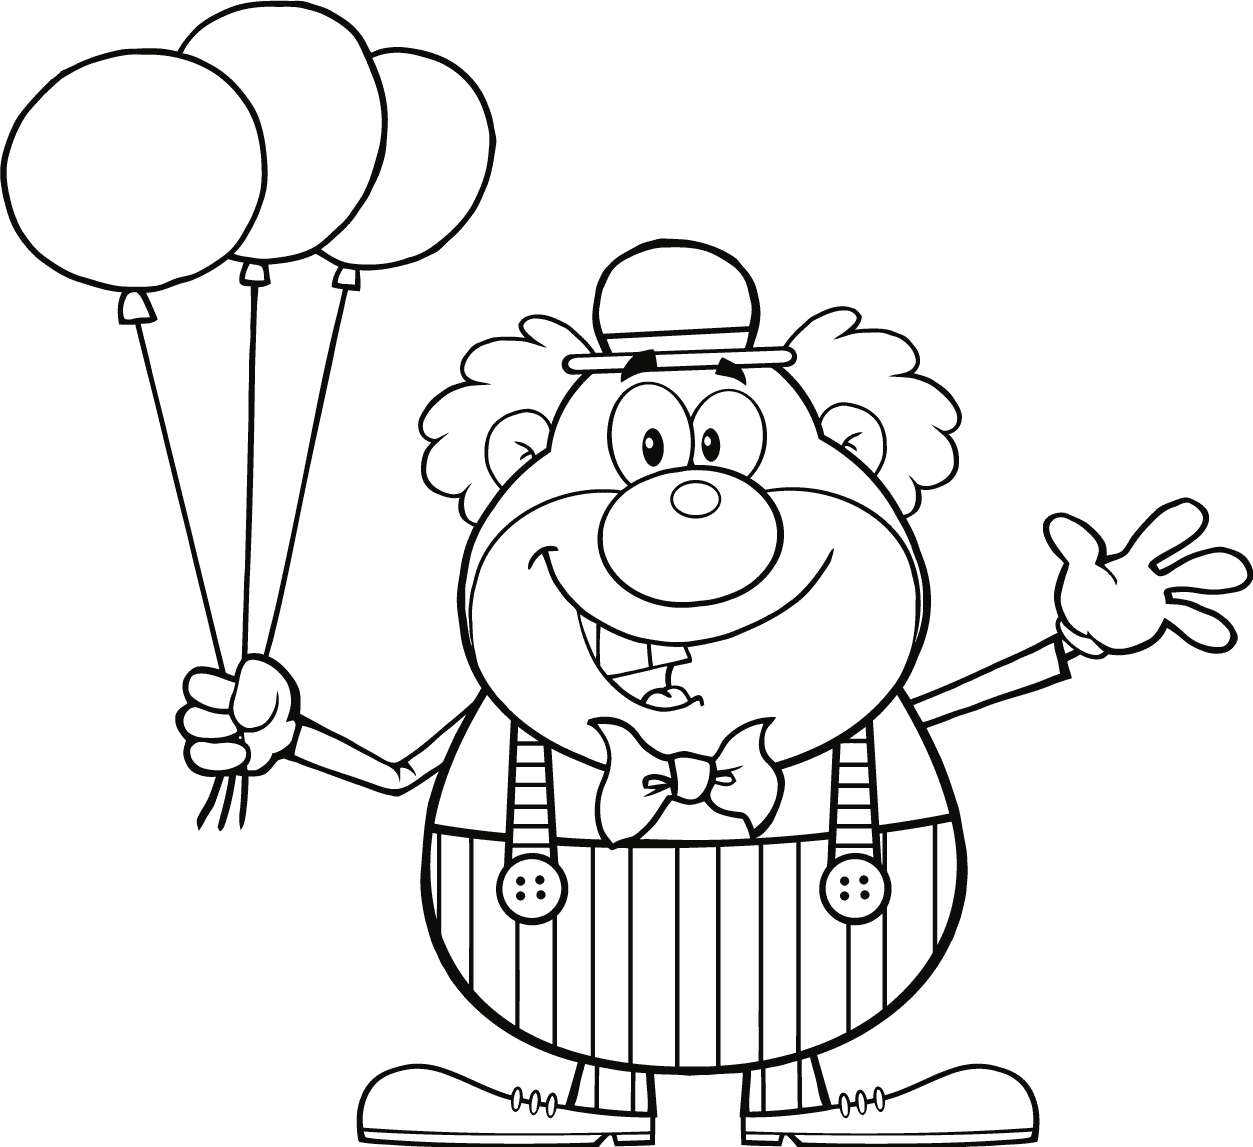 Clown Balloon Coloring Page